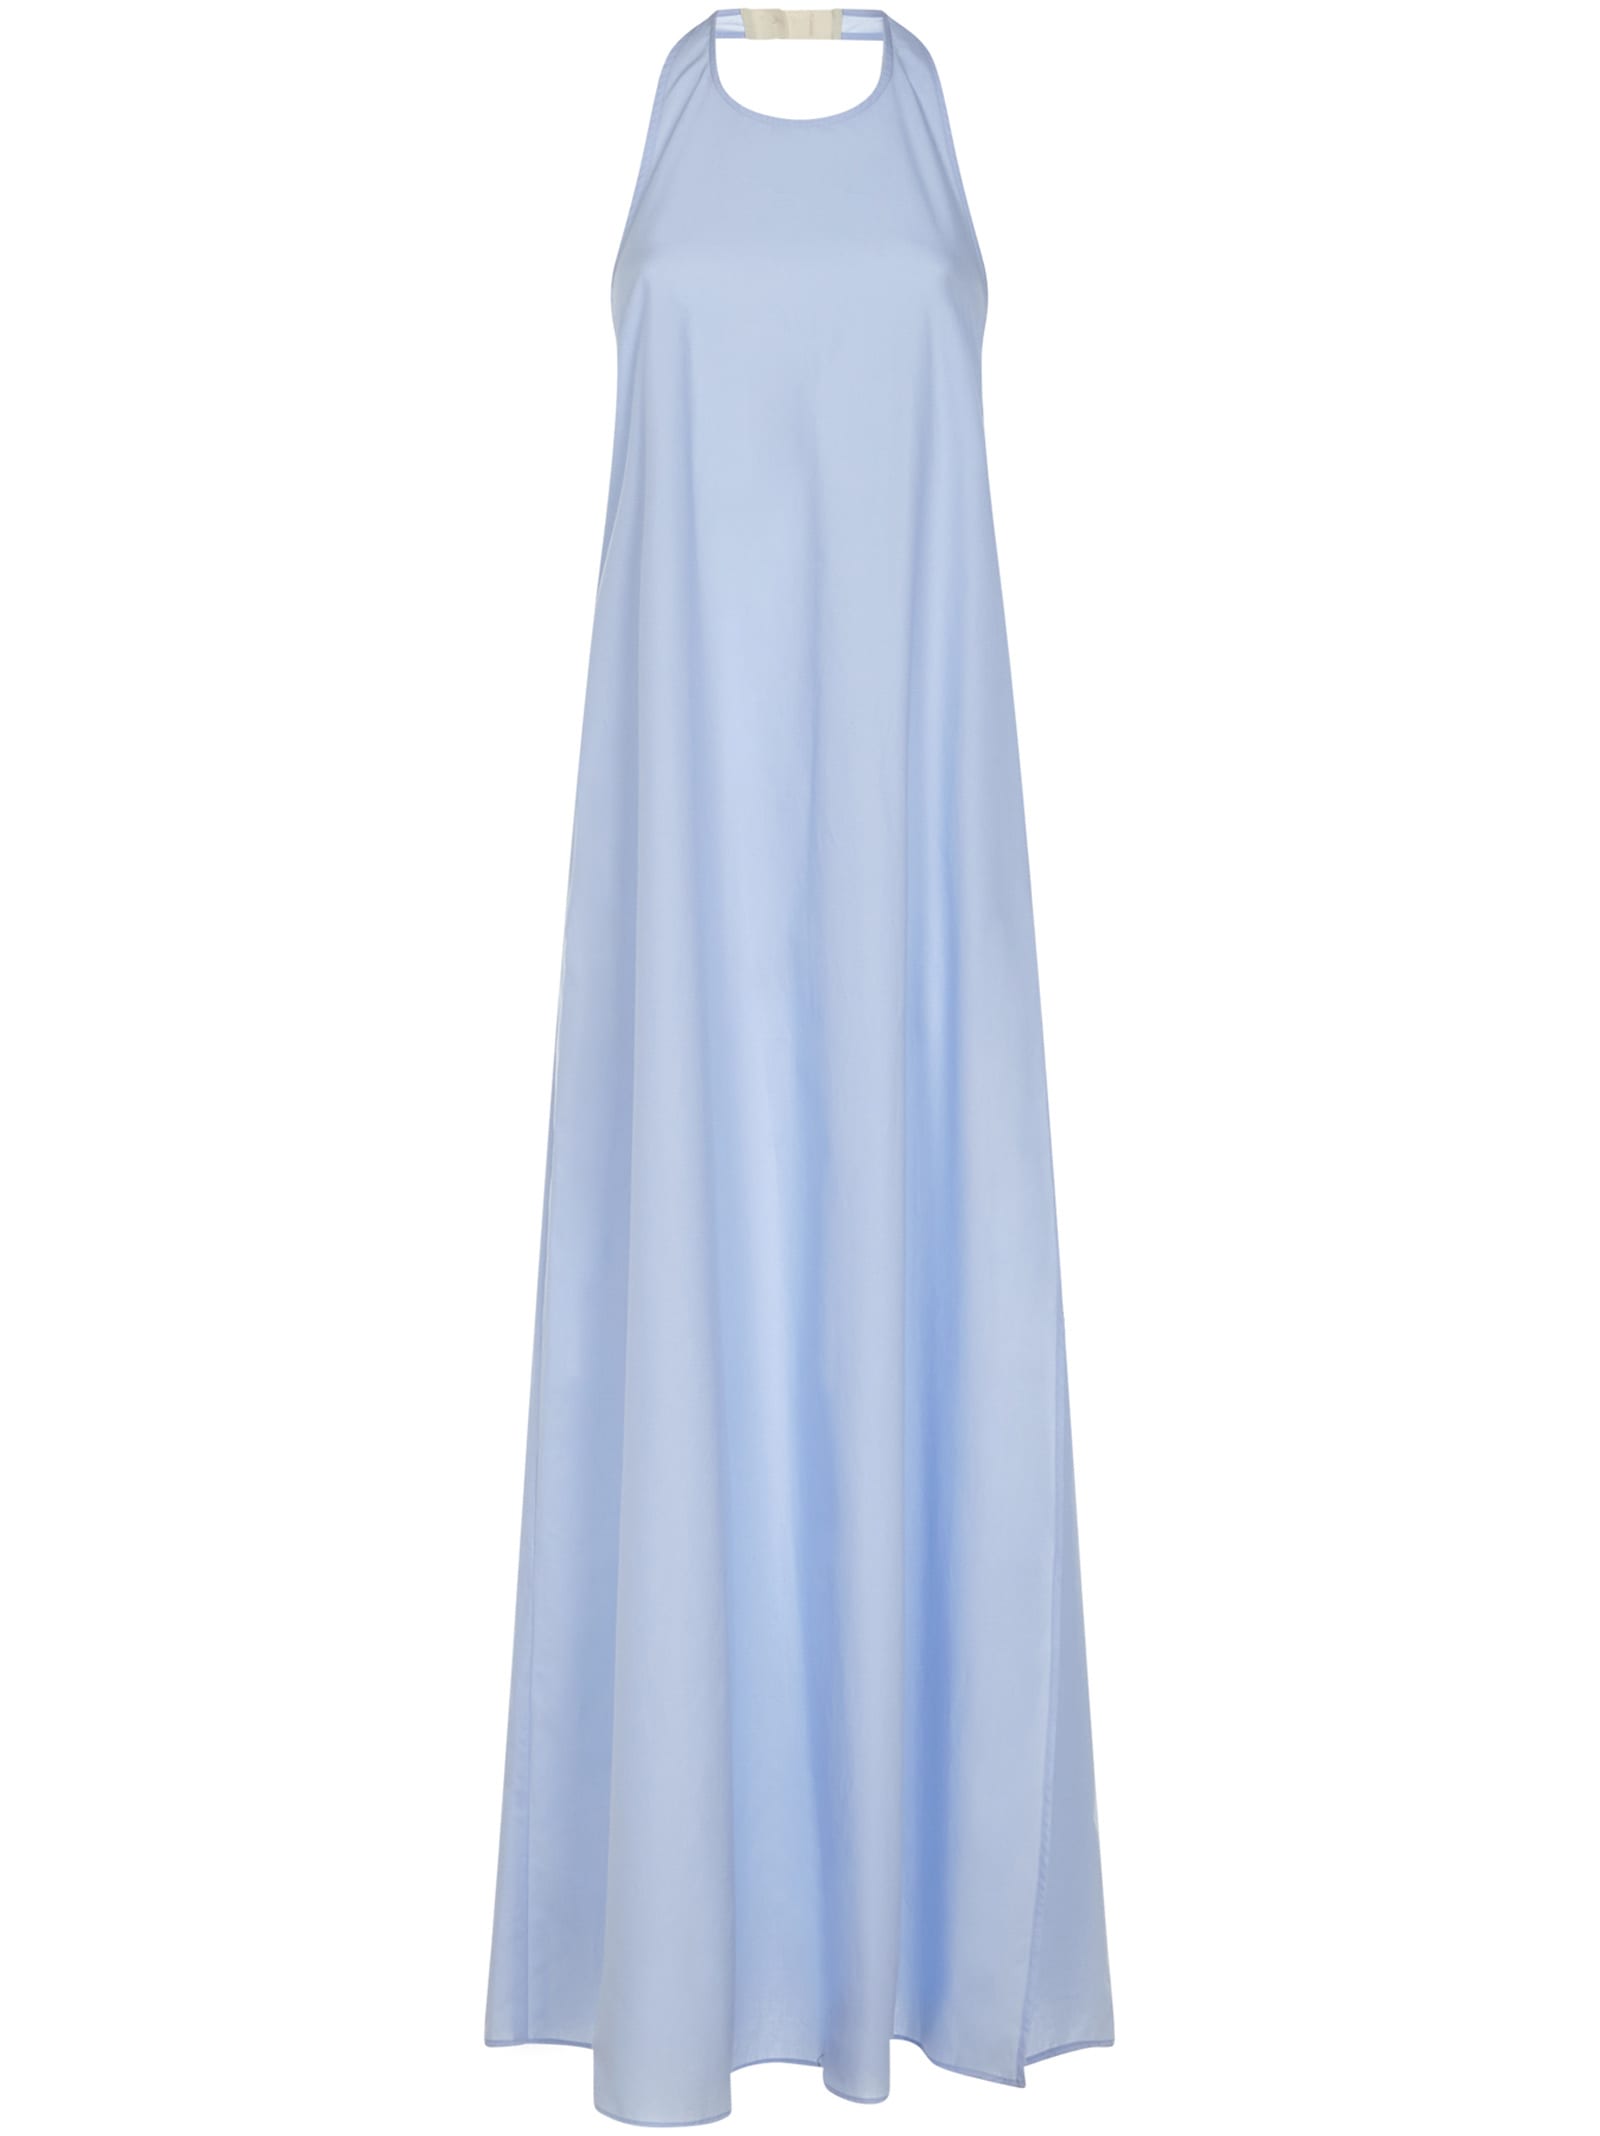 Mauro Grifoni Grifoni Dress In Light Blue